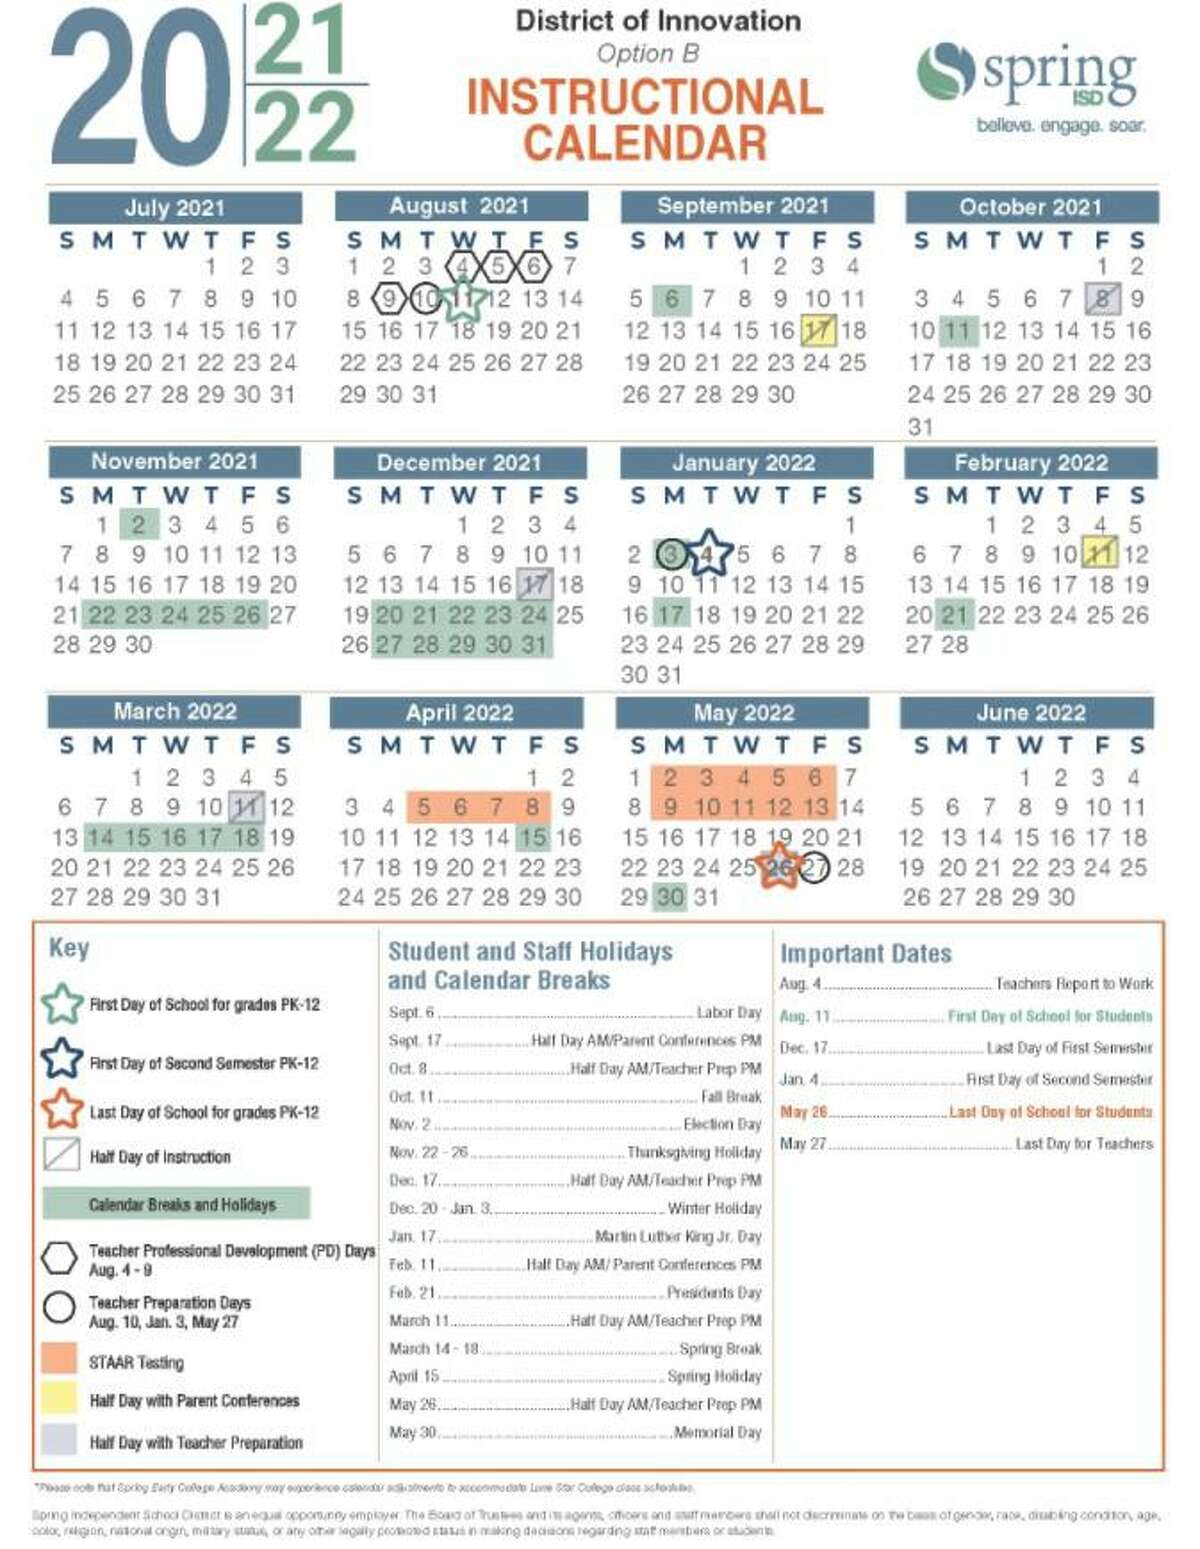 Spring ISD approves calendar for 20212022 school year